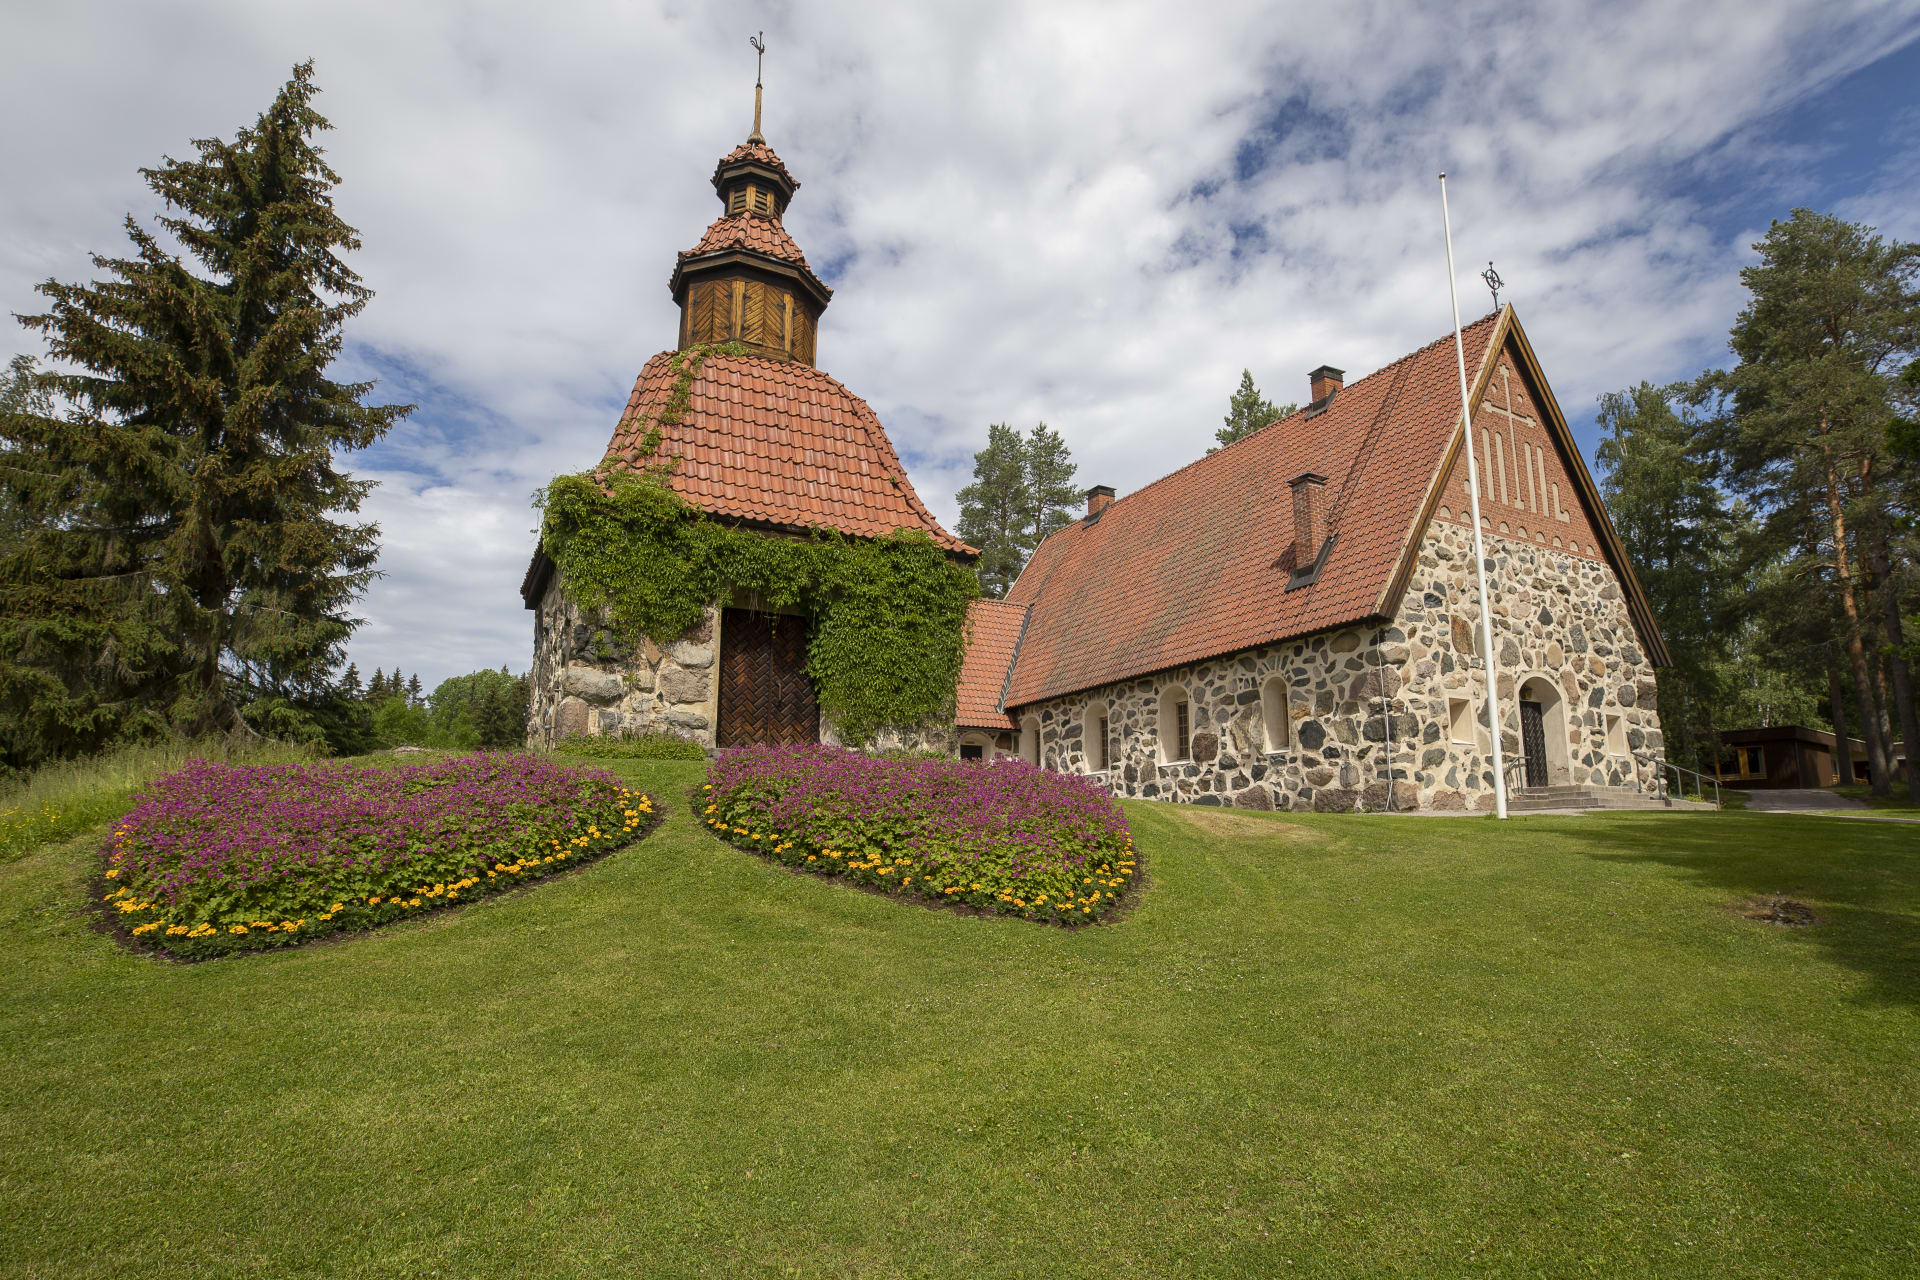 Medieval style church with red tiled roofing